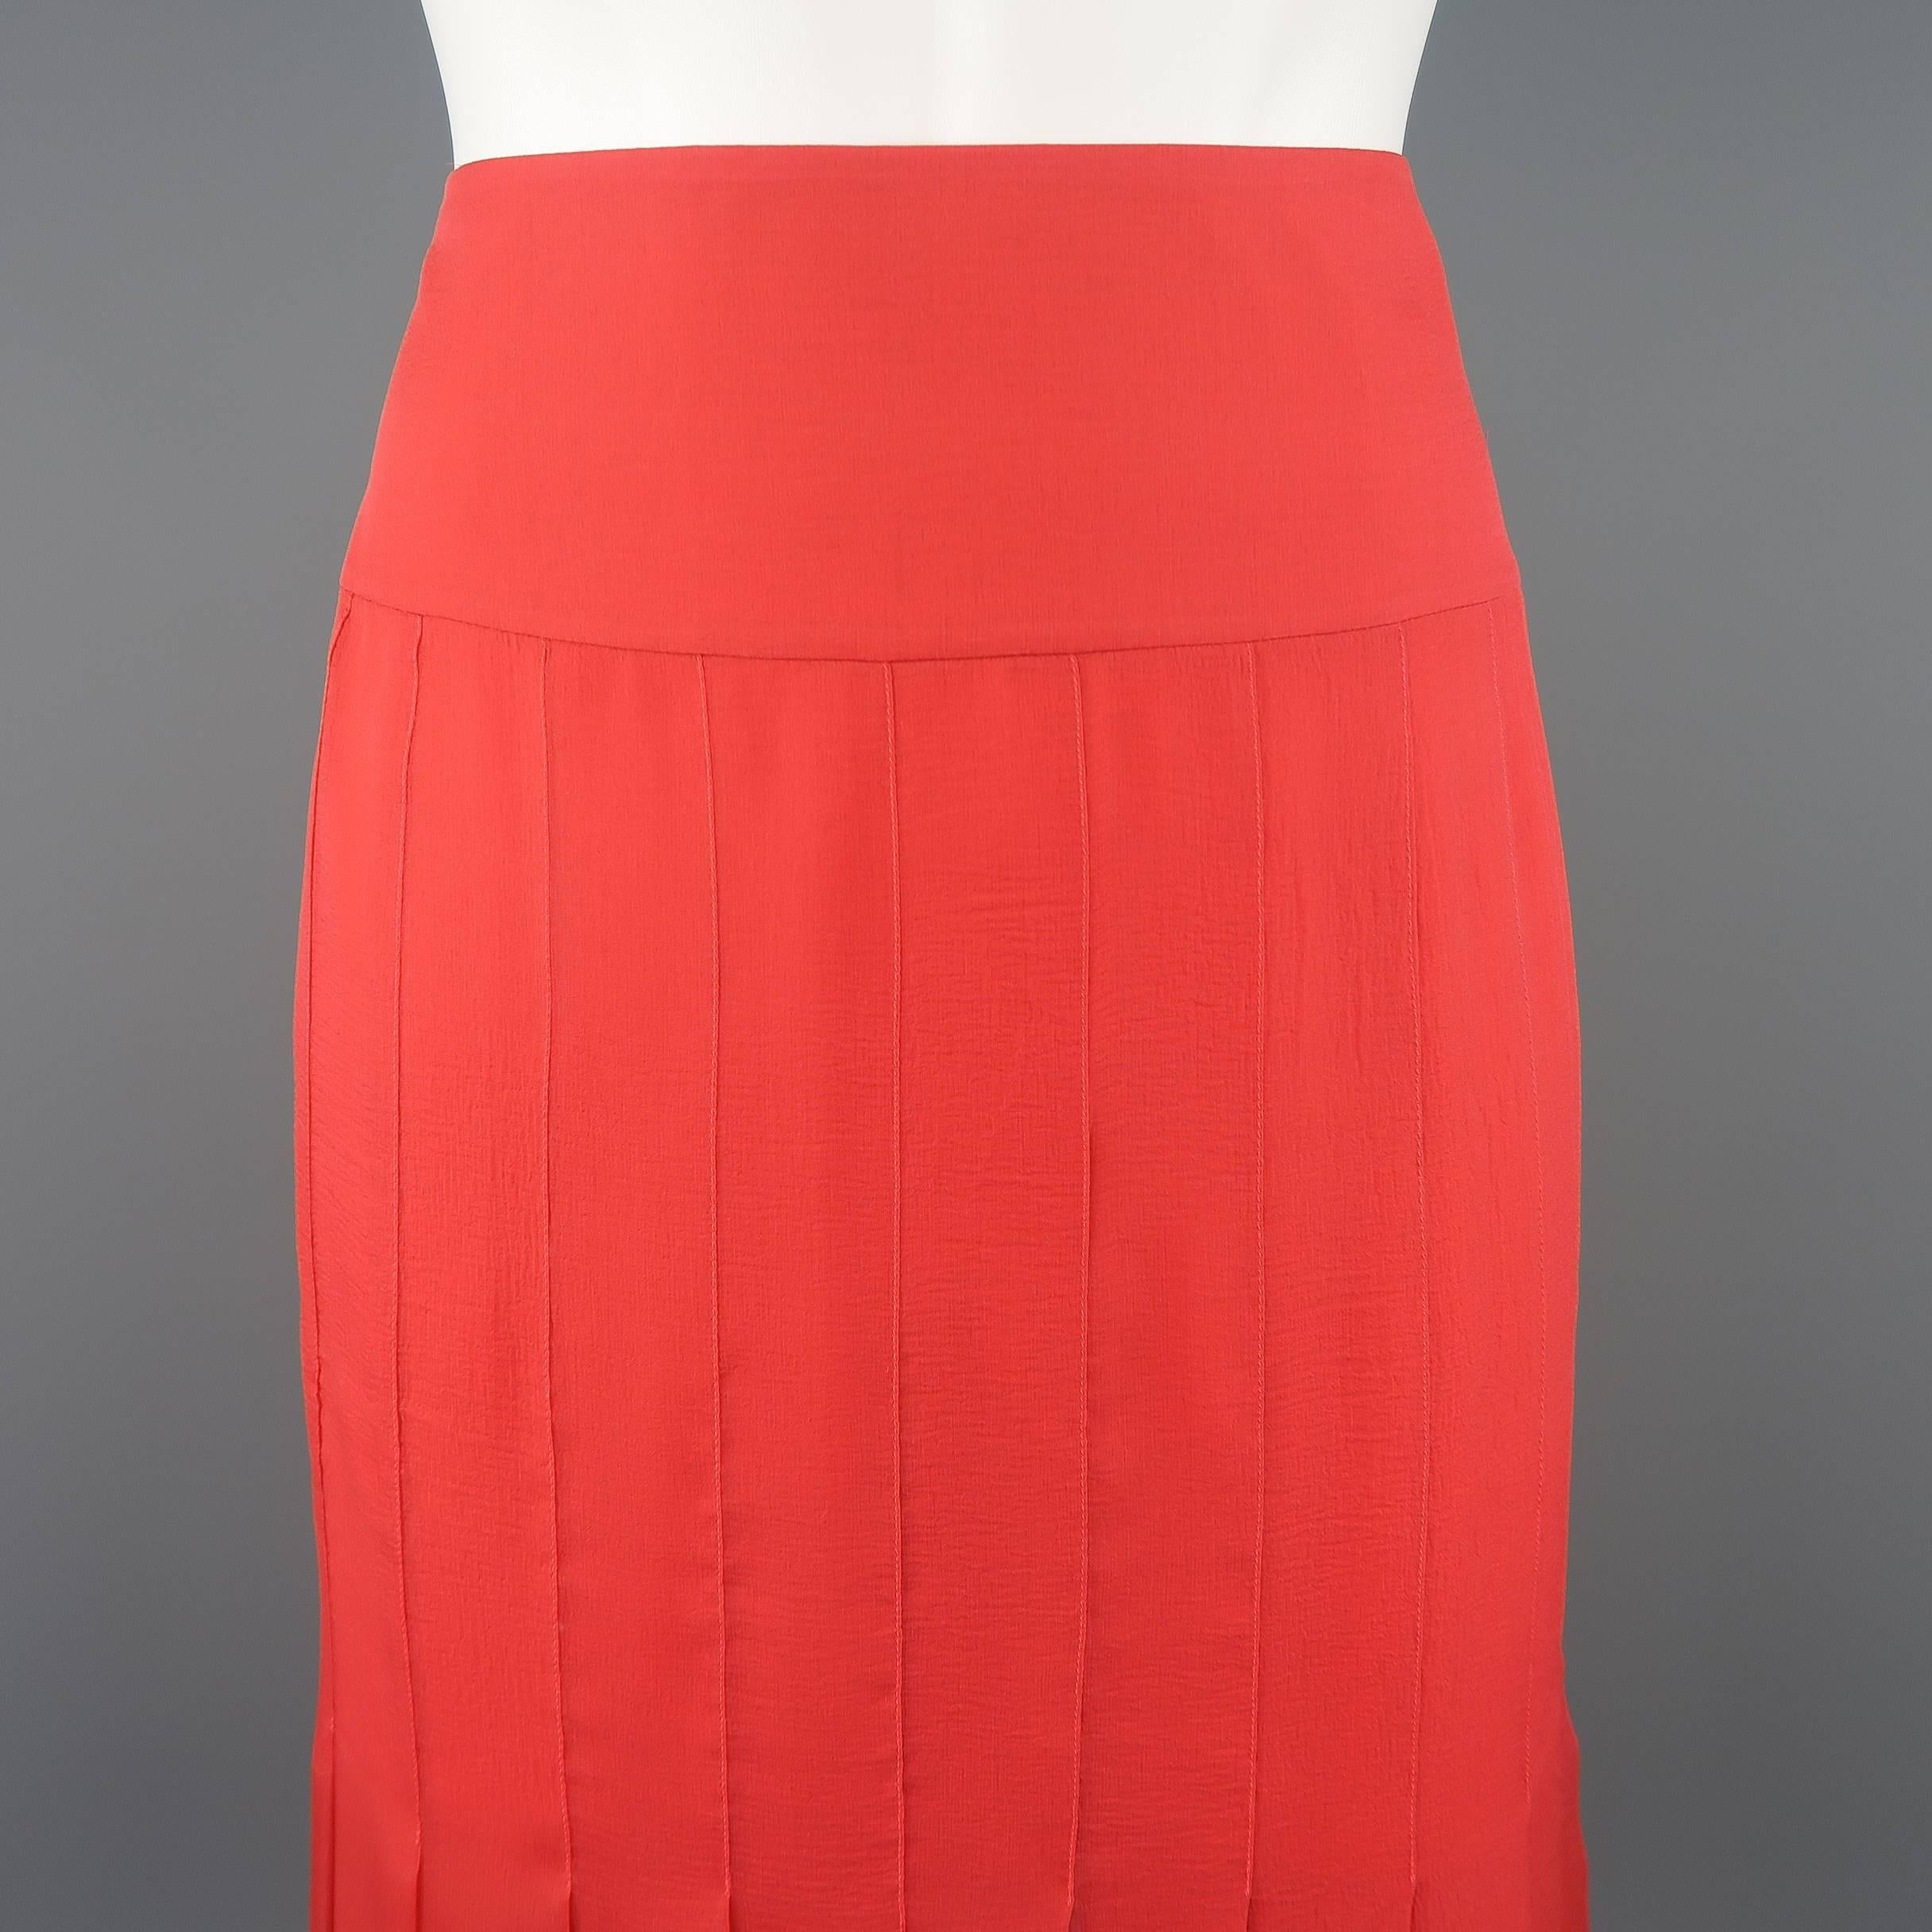 CHANEL pencil skirt comes in light red silk crepe chiffon with a box pleated construction, pleated hem, and thick waistband. Made in France.
 
Excellent Pre-Owned Condition.
Marked: FR 40  04P
 
Measurements:
 
Waist: 30 in.
Hip: 40 in.
Length: 22.5